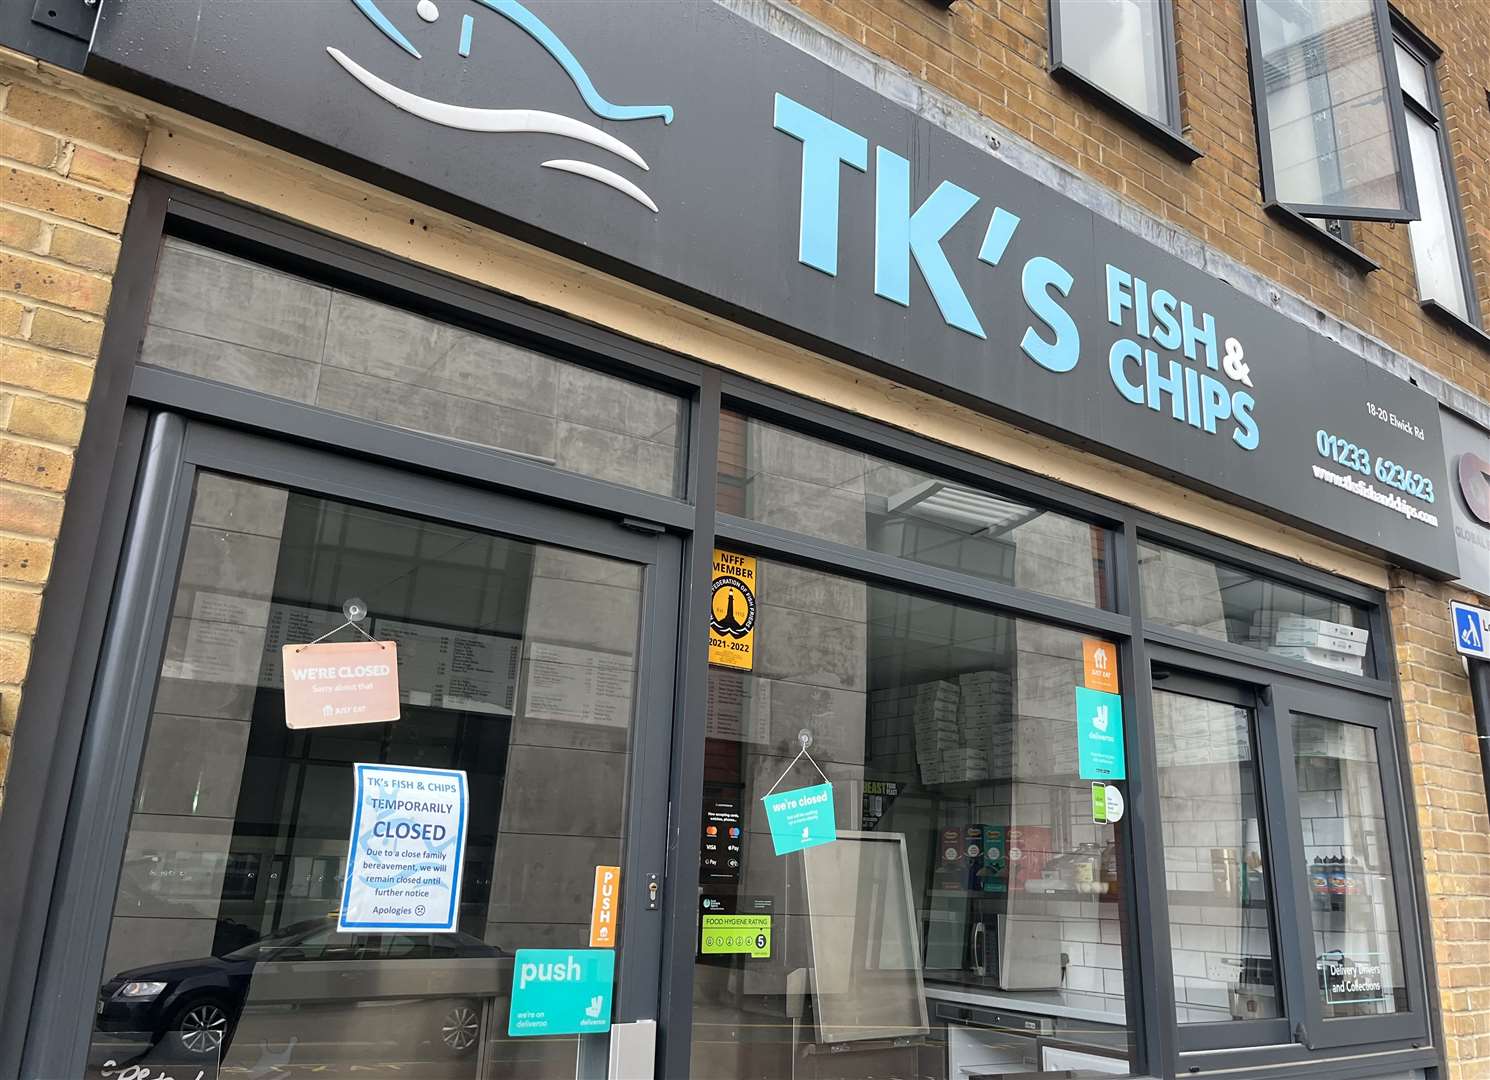 TK's fish and chip shop has closed in Ashford